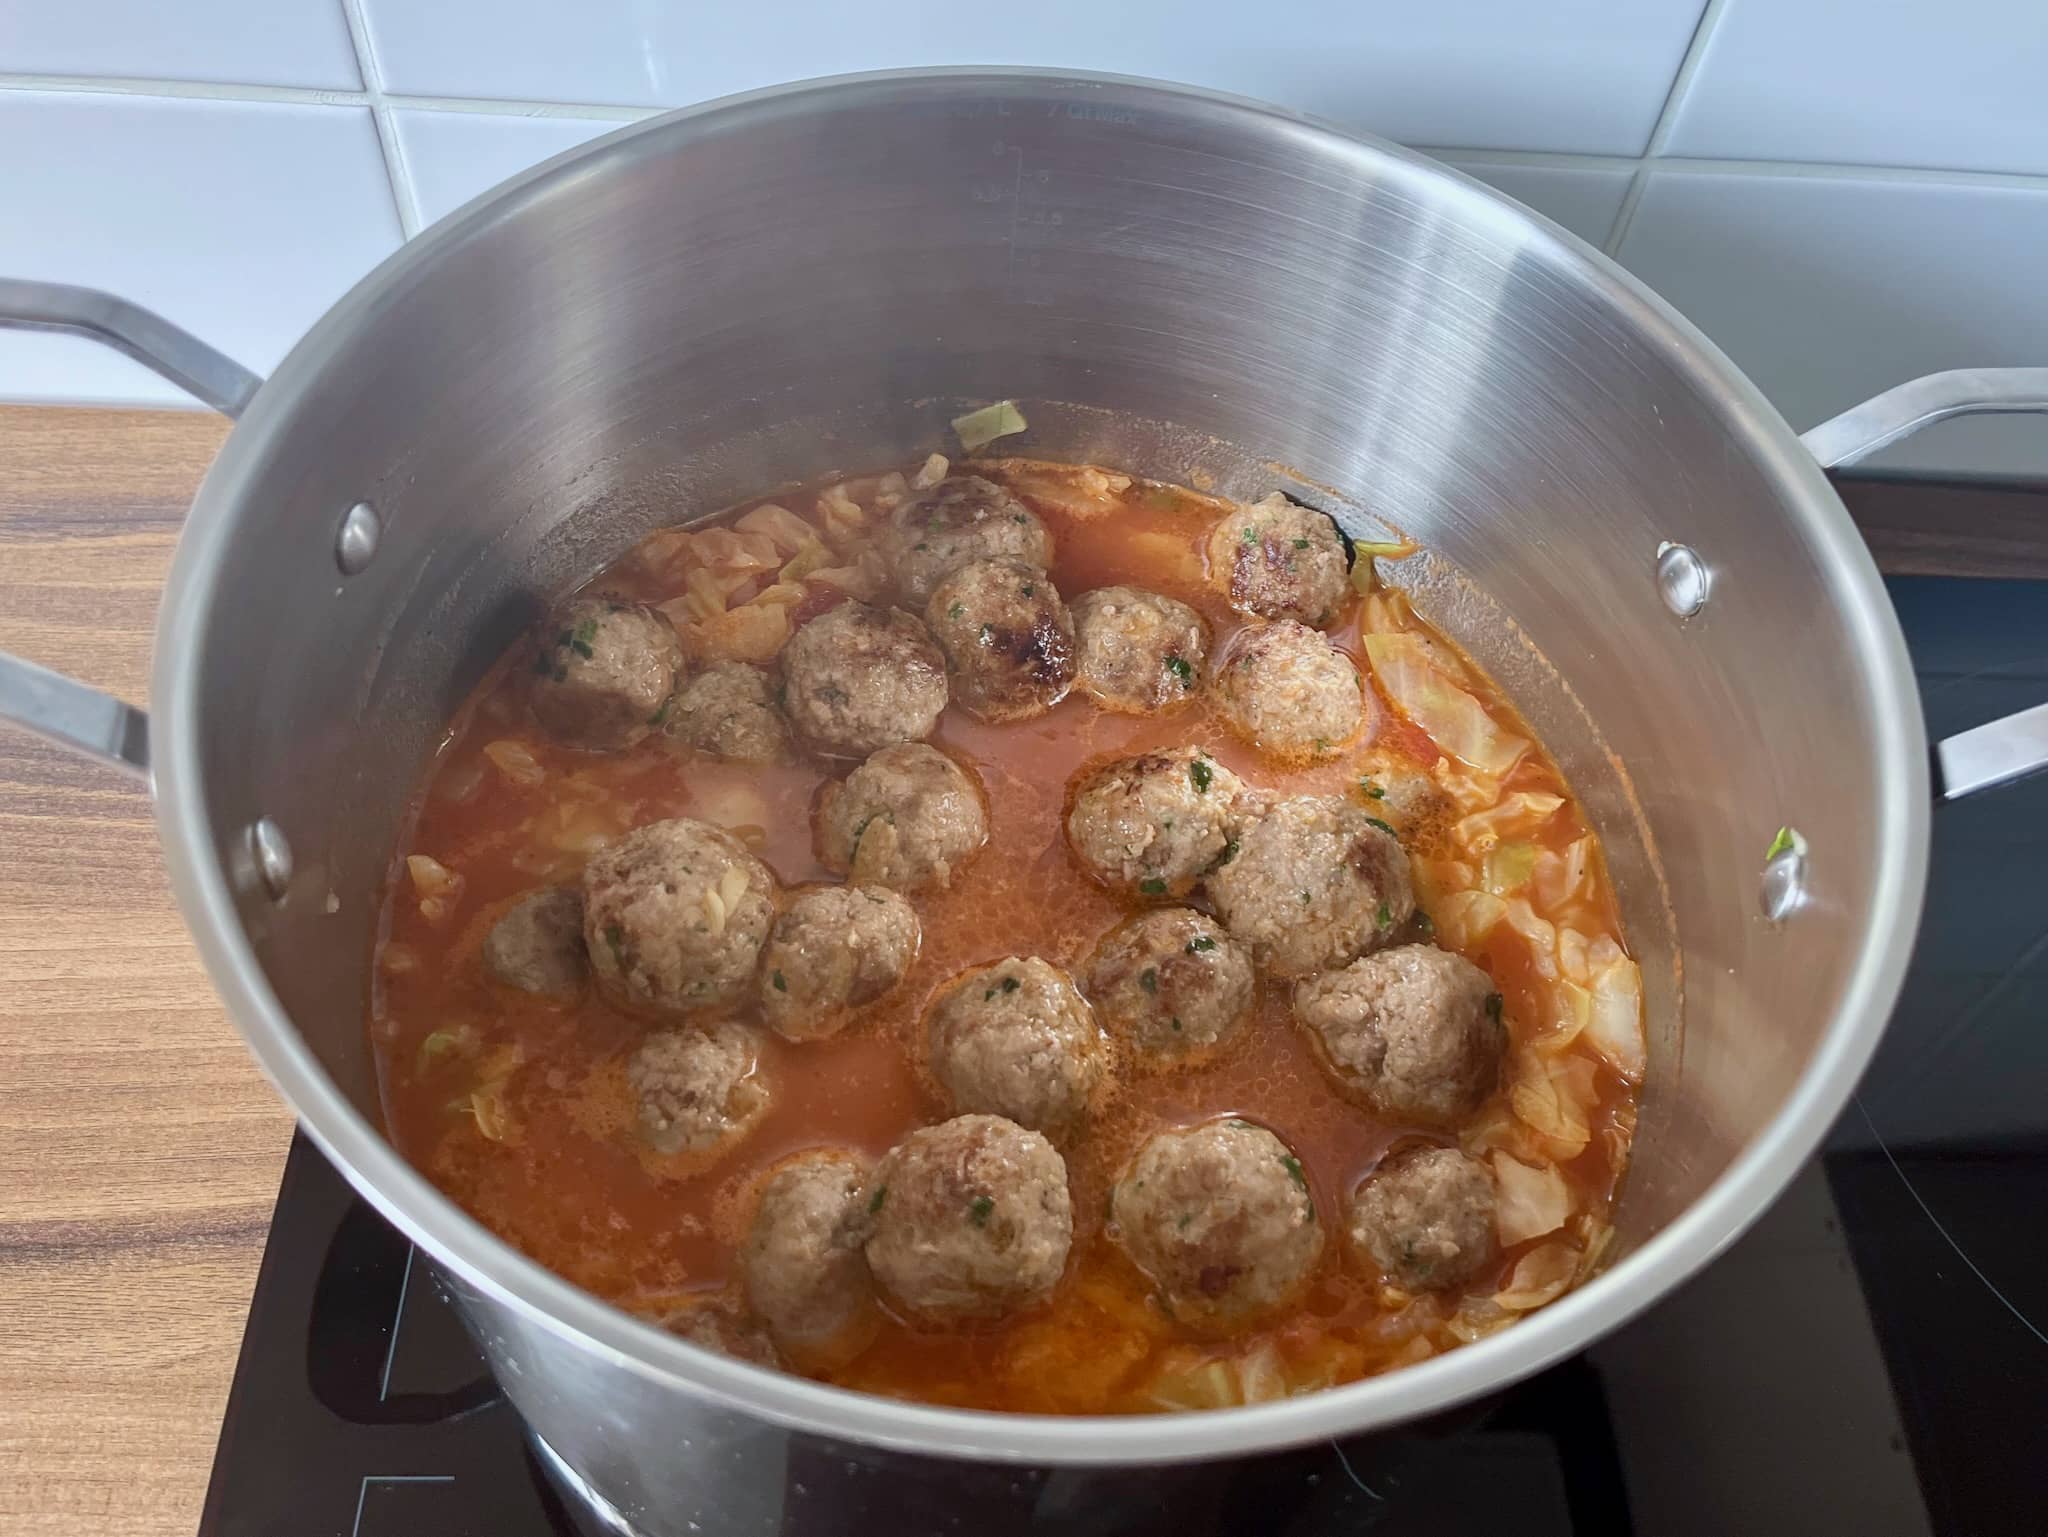 Cabbage and meatballs cooking in a pan